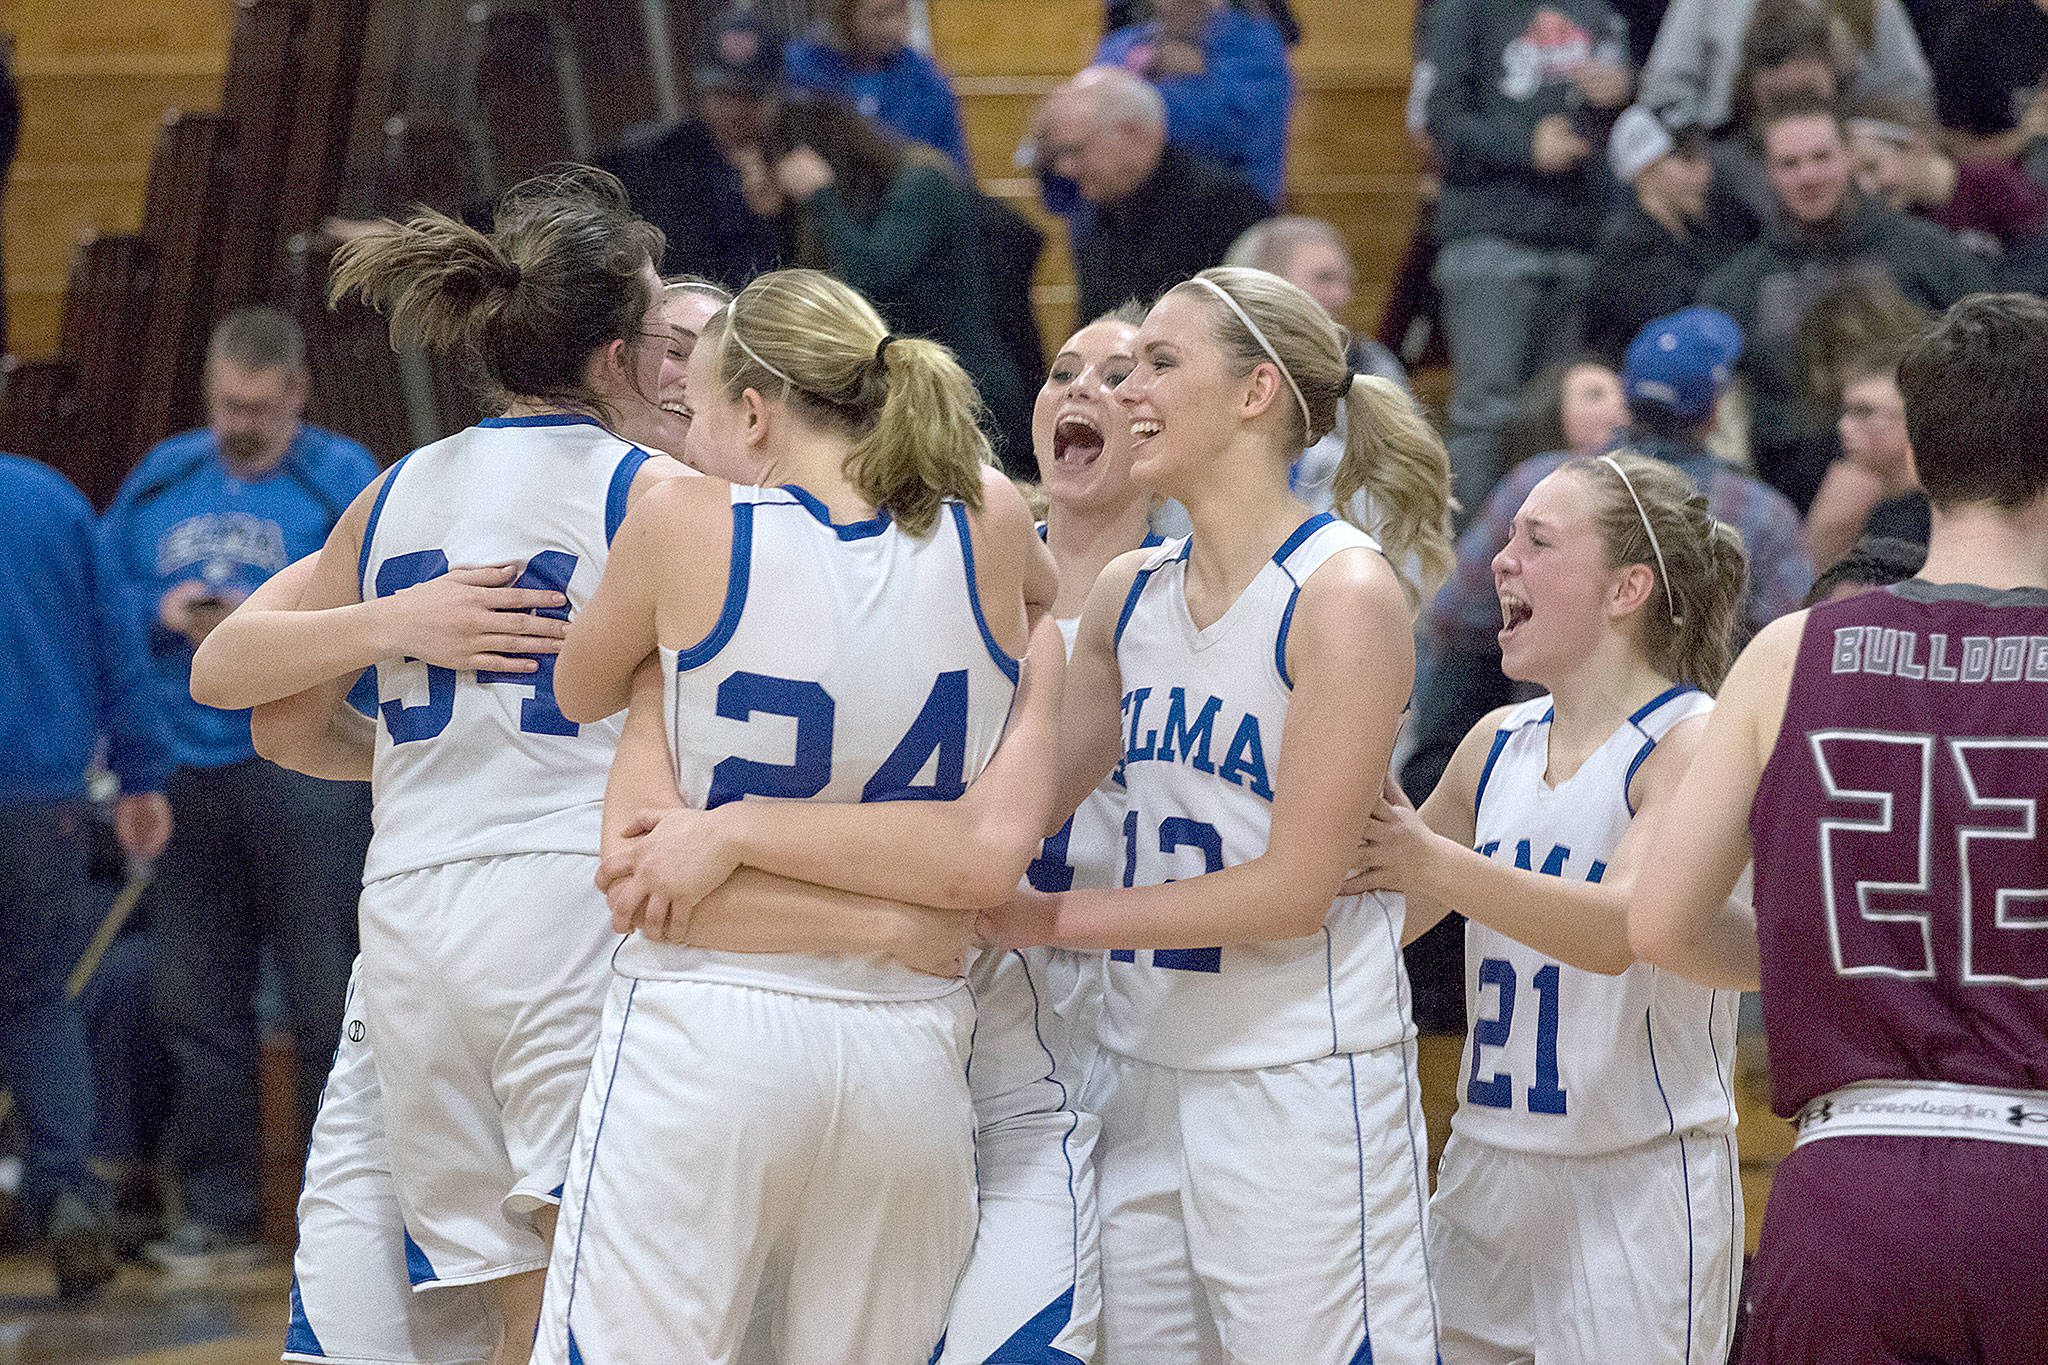 Elma players celebrate after defeating Montesano, 60-50, in an Evergreen 1A League contest on Thursday night. With the victory, the Eagles brought Montesano’s 53-game league winning streak to an end. See story and more photos in Sports. (Brendan Carl Photography)